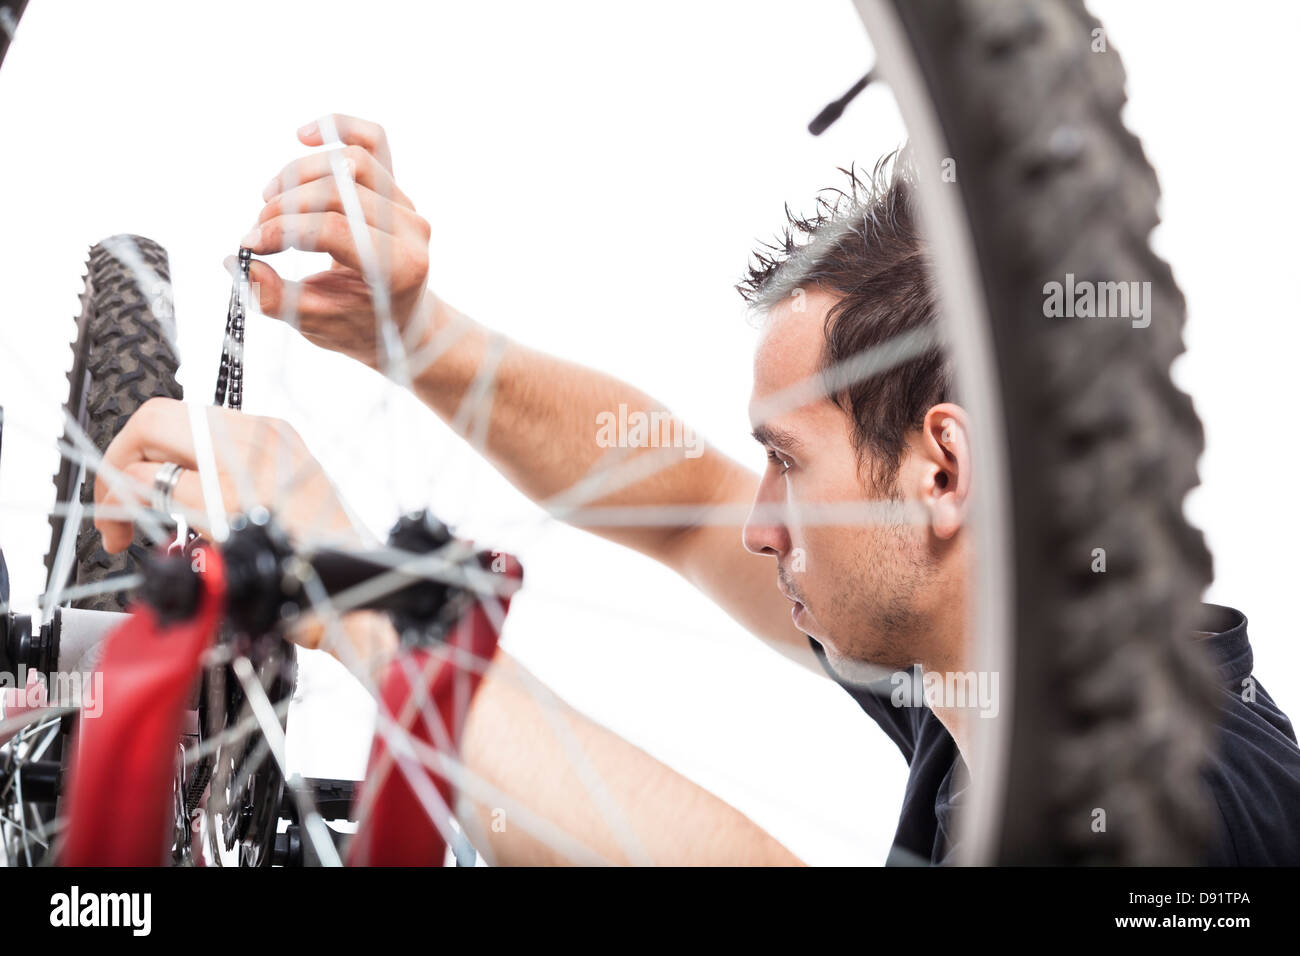 Young man adjusting bike chain and repairing bicycle, isolated on white background Stock Photo